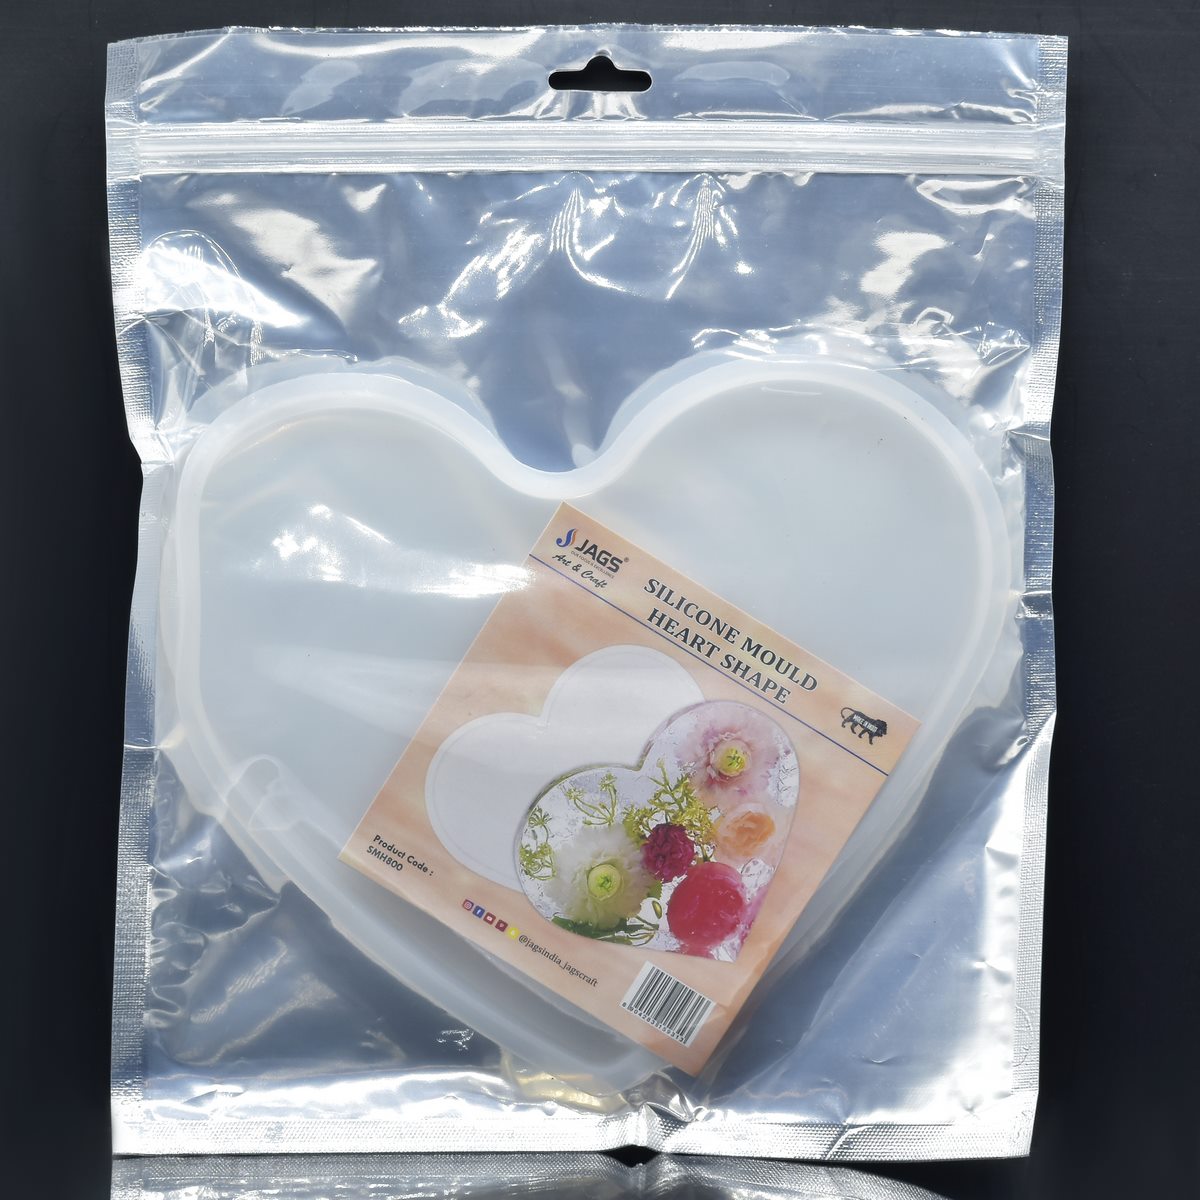 jags-mumbai Mould Silicone Mould Heart 10MM Deep 8 Inch SMH800